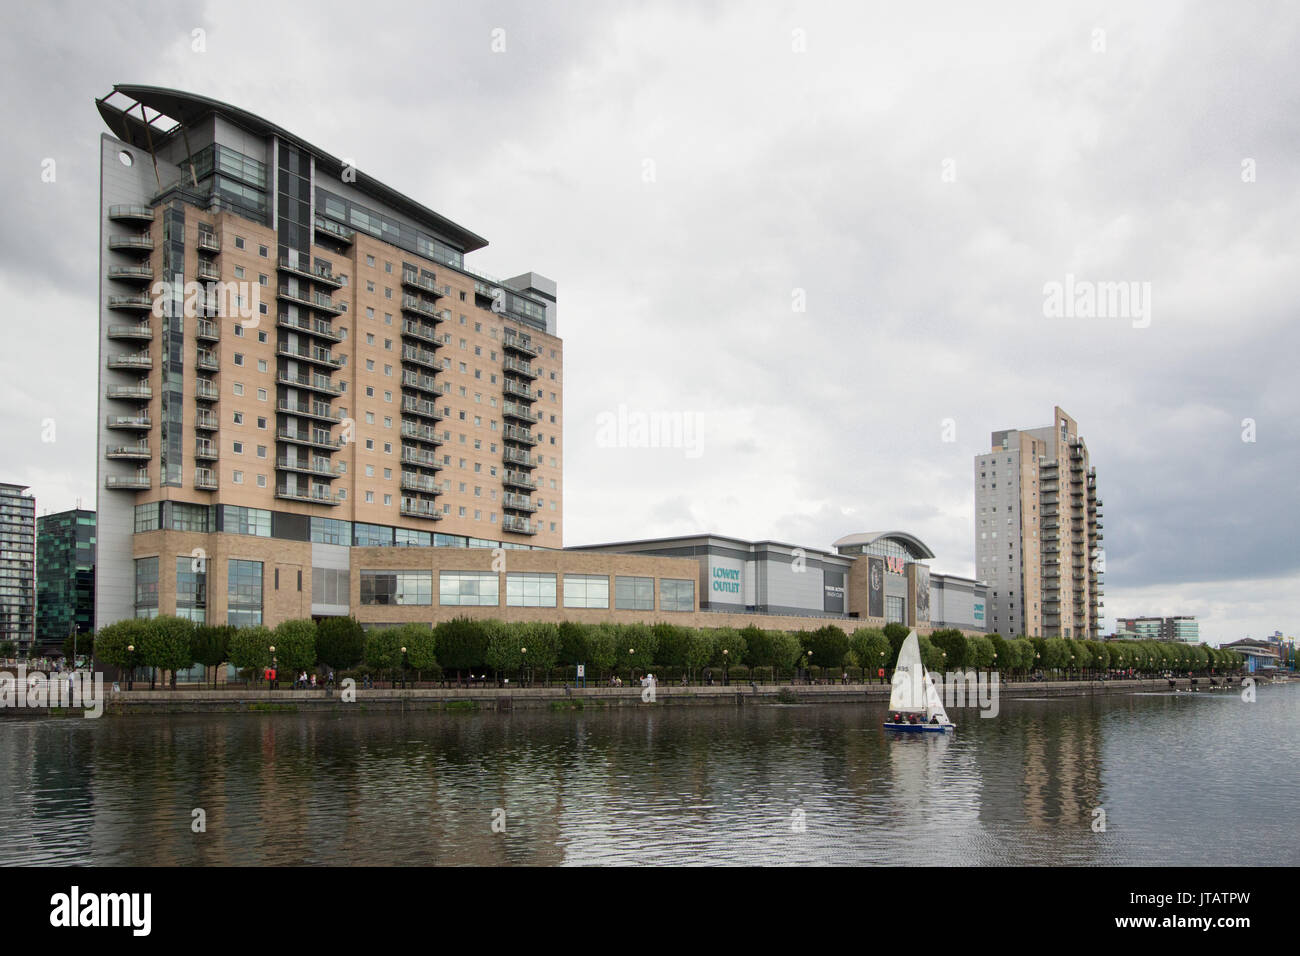 Salford Quays is an area of Salford, Greater Manchester, England, near the end of the Manchester Ship Canal. Previously the site of Manchester Docks Stock Photo